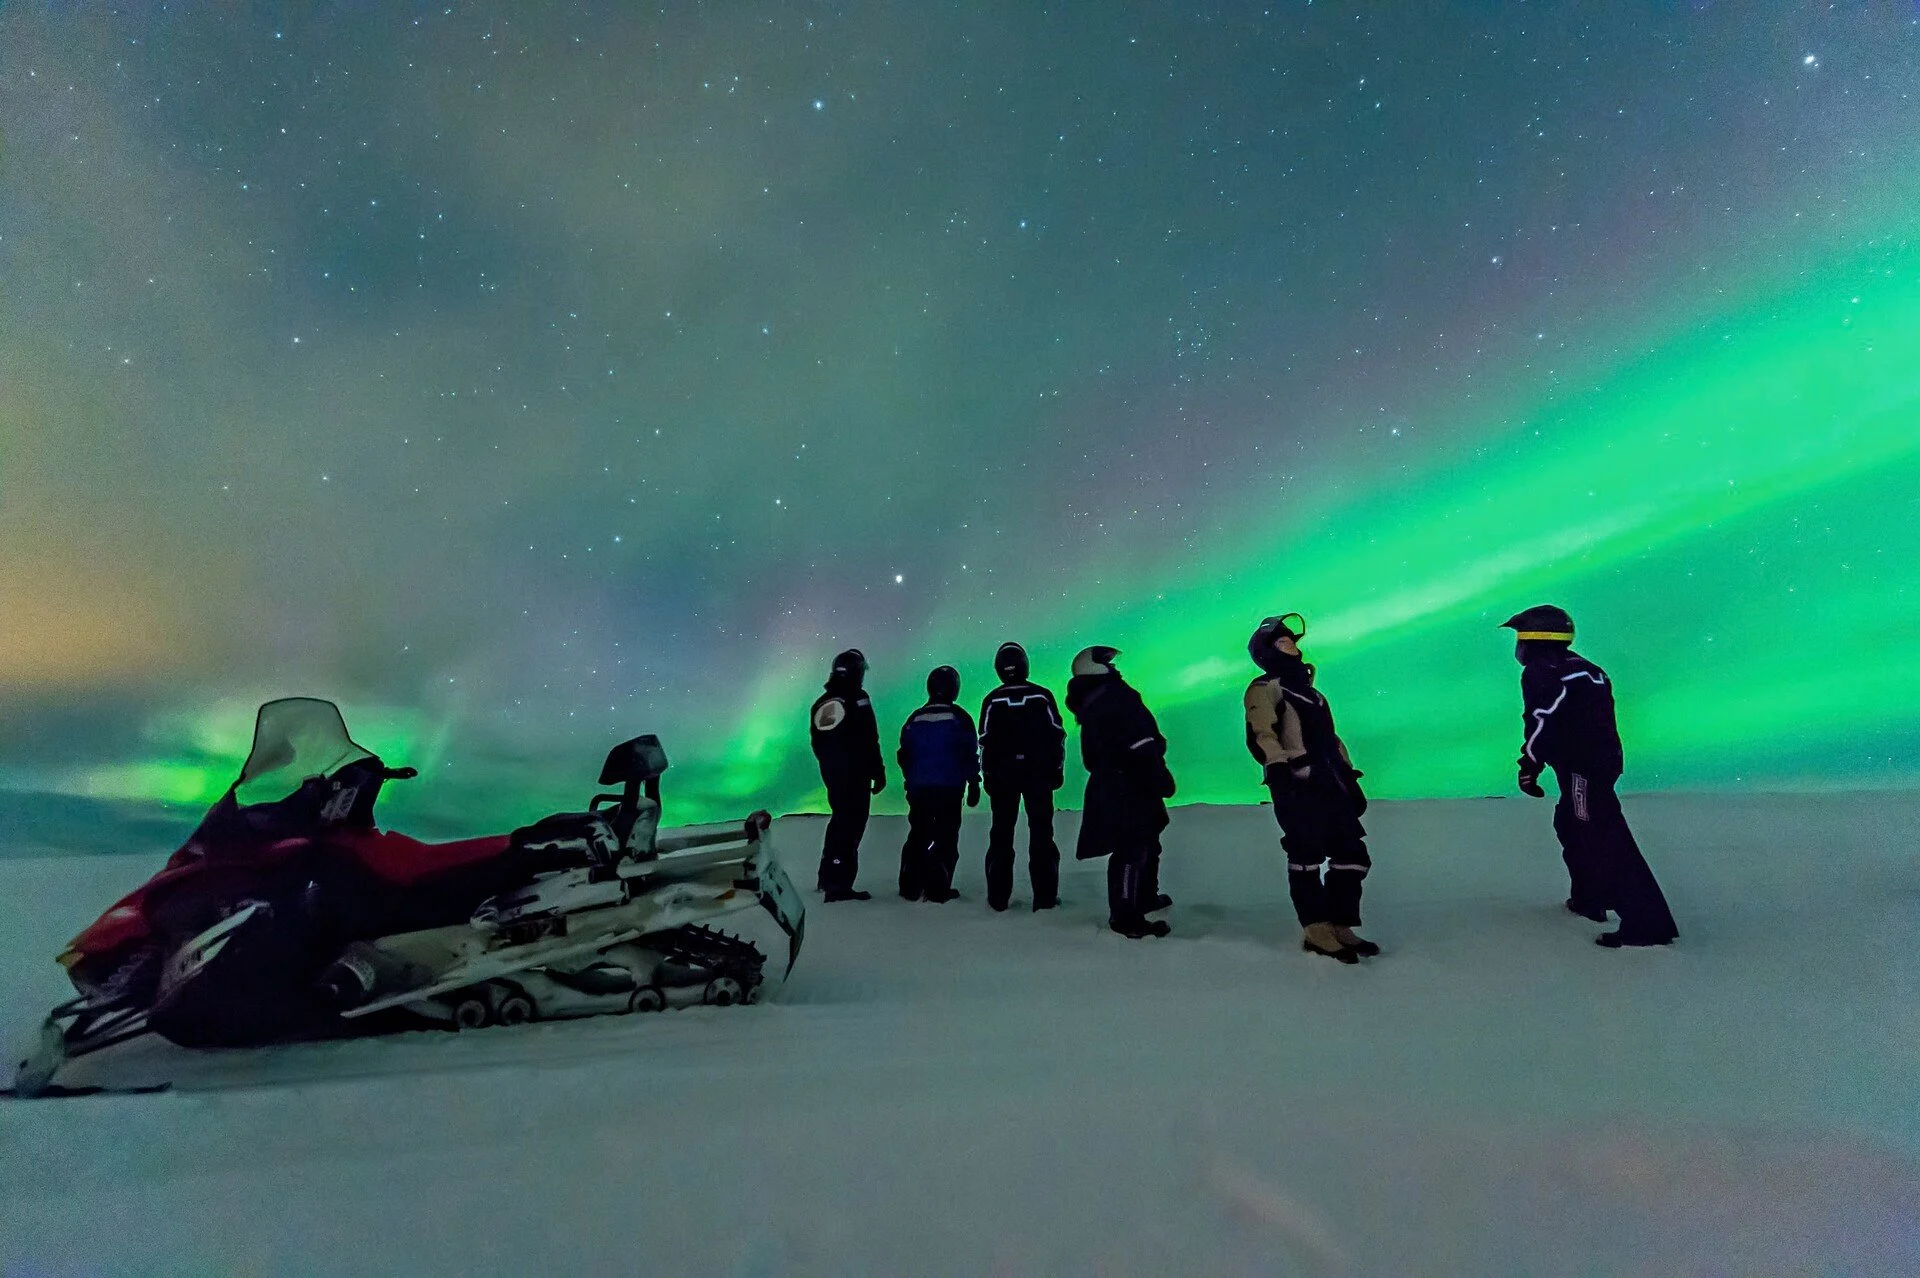 A group of tourists on a snowmobile excursion in Norway under the Northern Lights